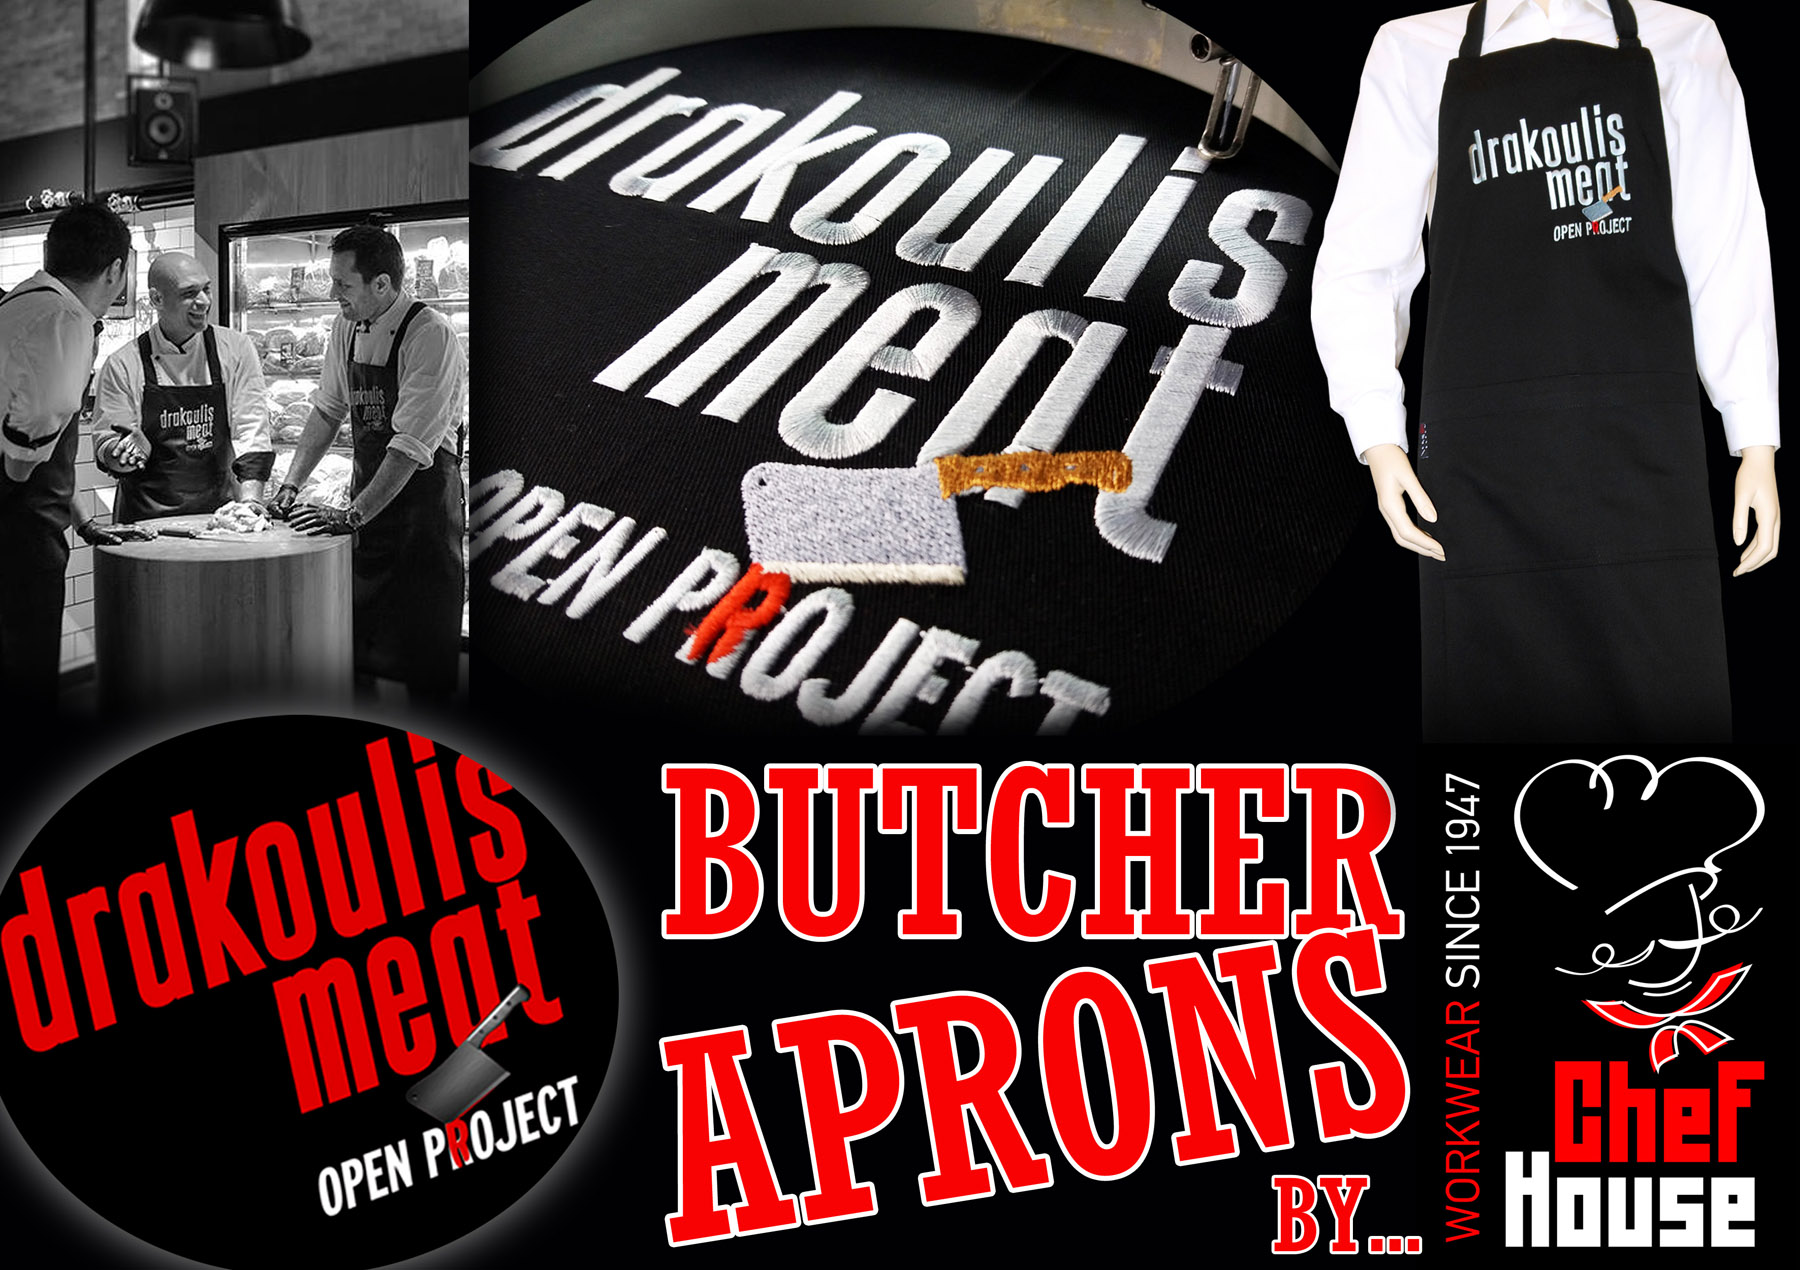 Embroidery Drakoulis meat on bib butcher aprons by Chef House Workwear